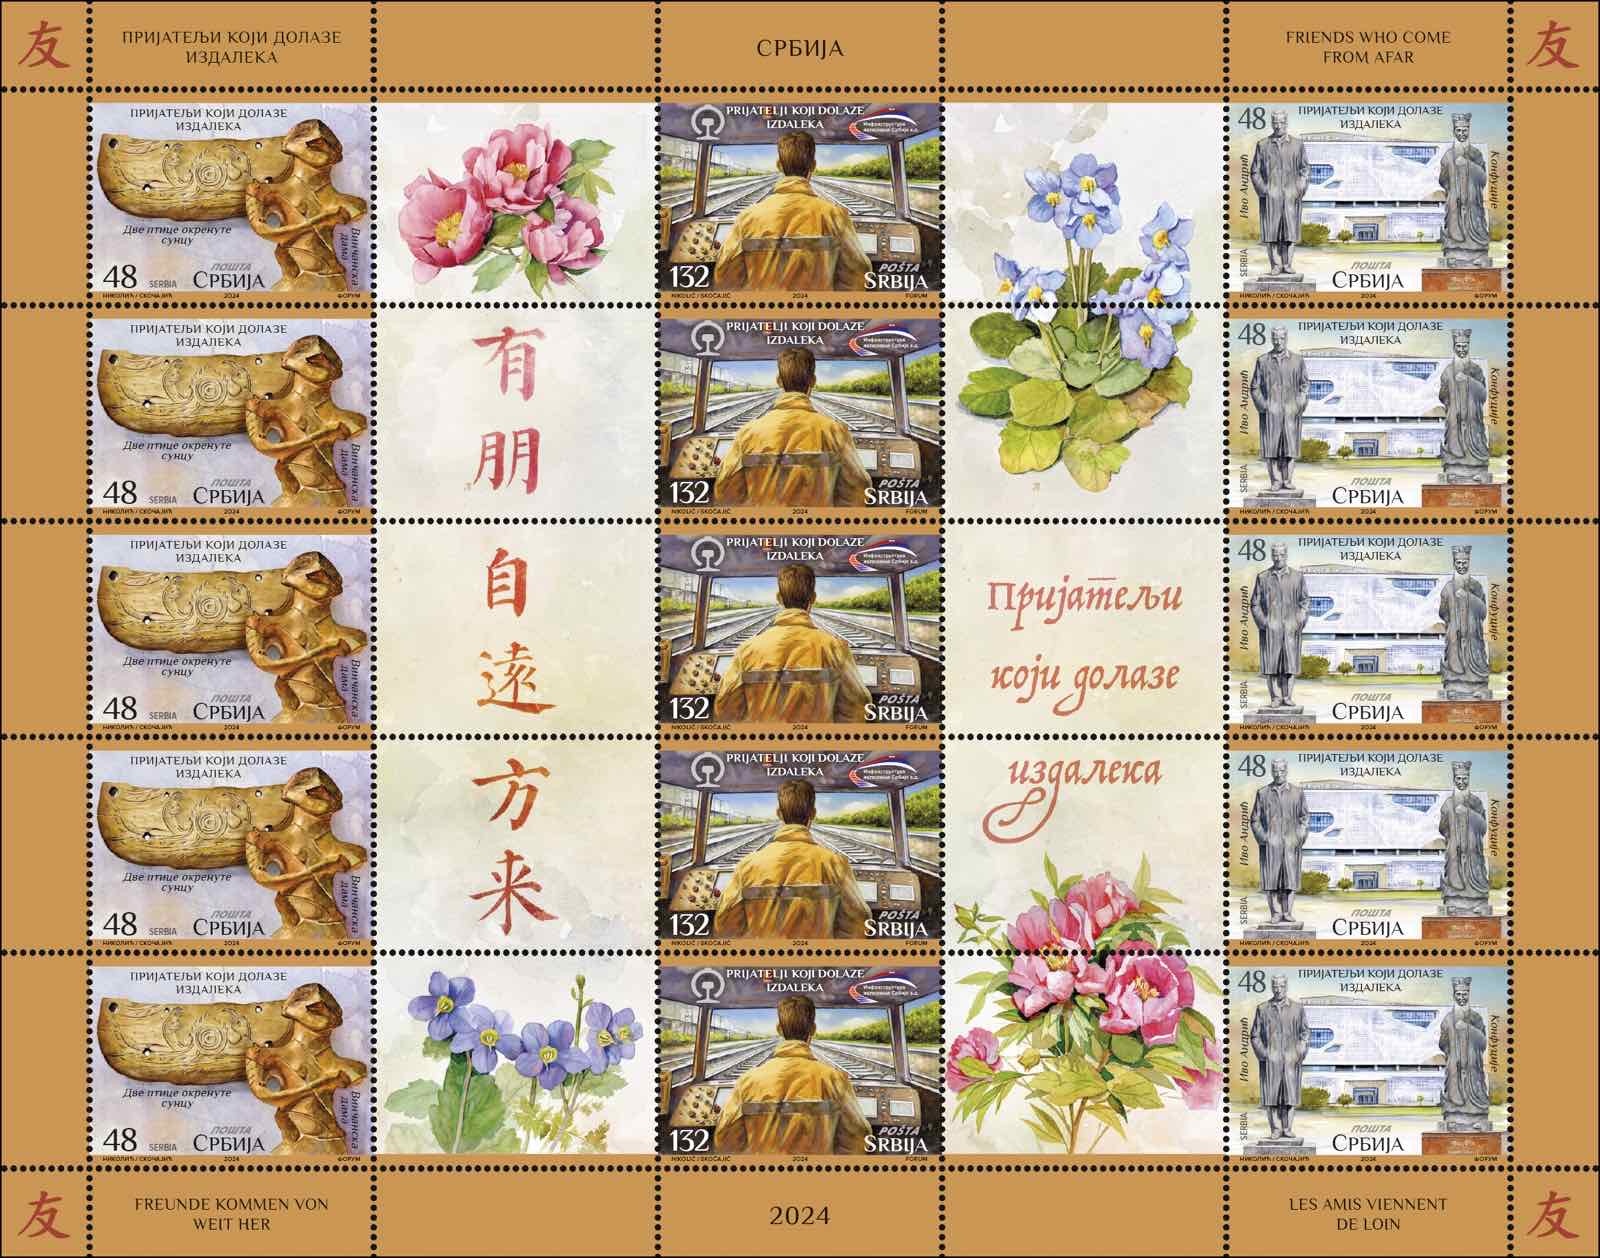 The commemorative postage stamps – “Friends from afar,” issued by China Cultural Center in Belgrade, in collaboration with China Media Group and the Post of Serbia in Belgrade, Serbia, on Tuesday afternoon local time